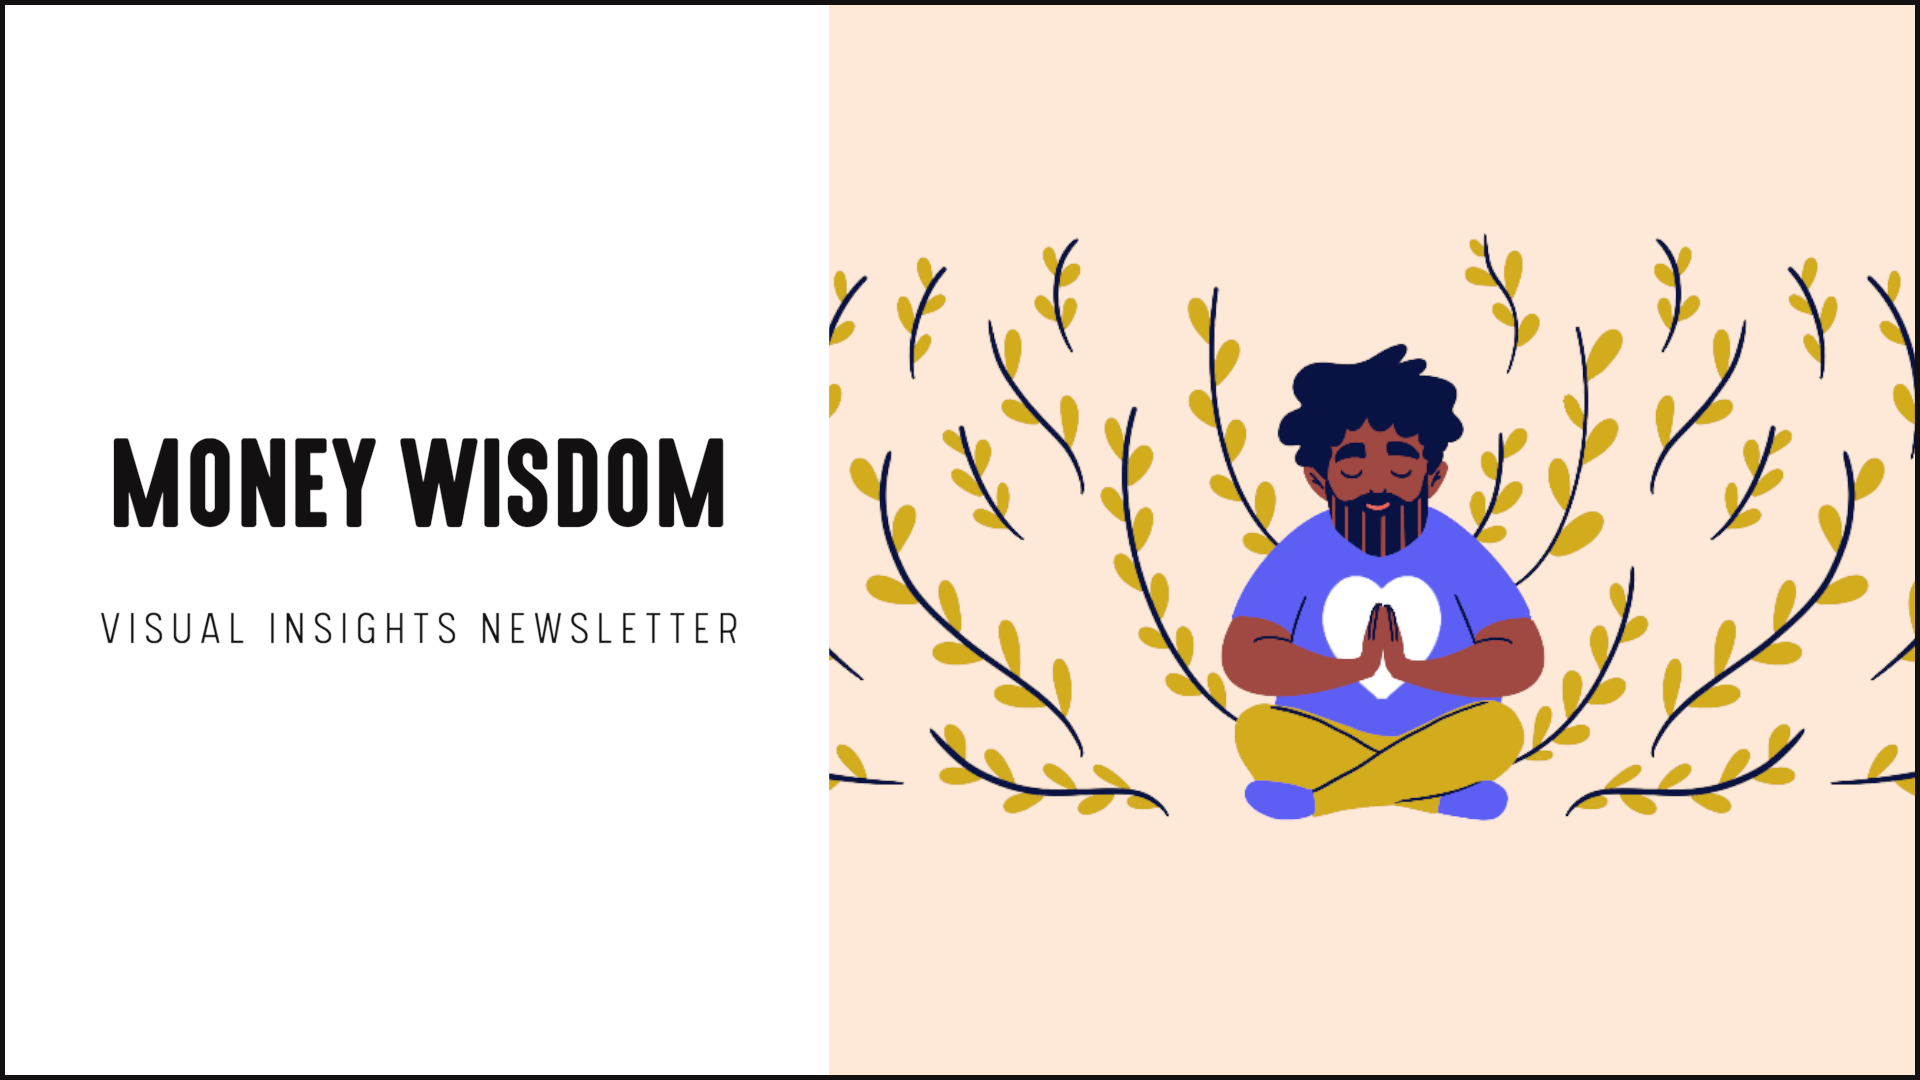 [NEW] Money Wisdom - Visual Insights Newsletter Marketing Campaigns for Financial Advisors